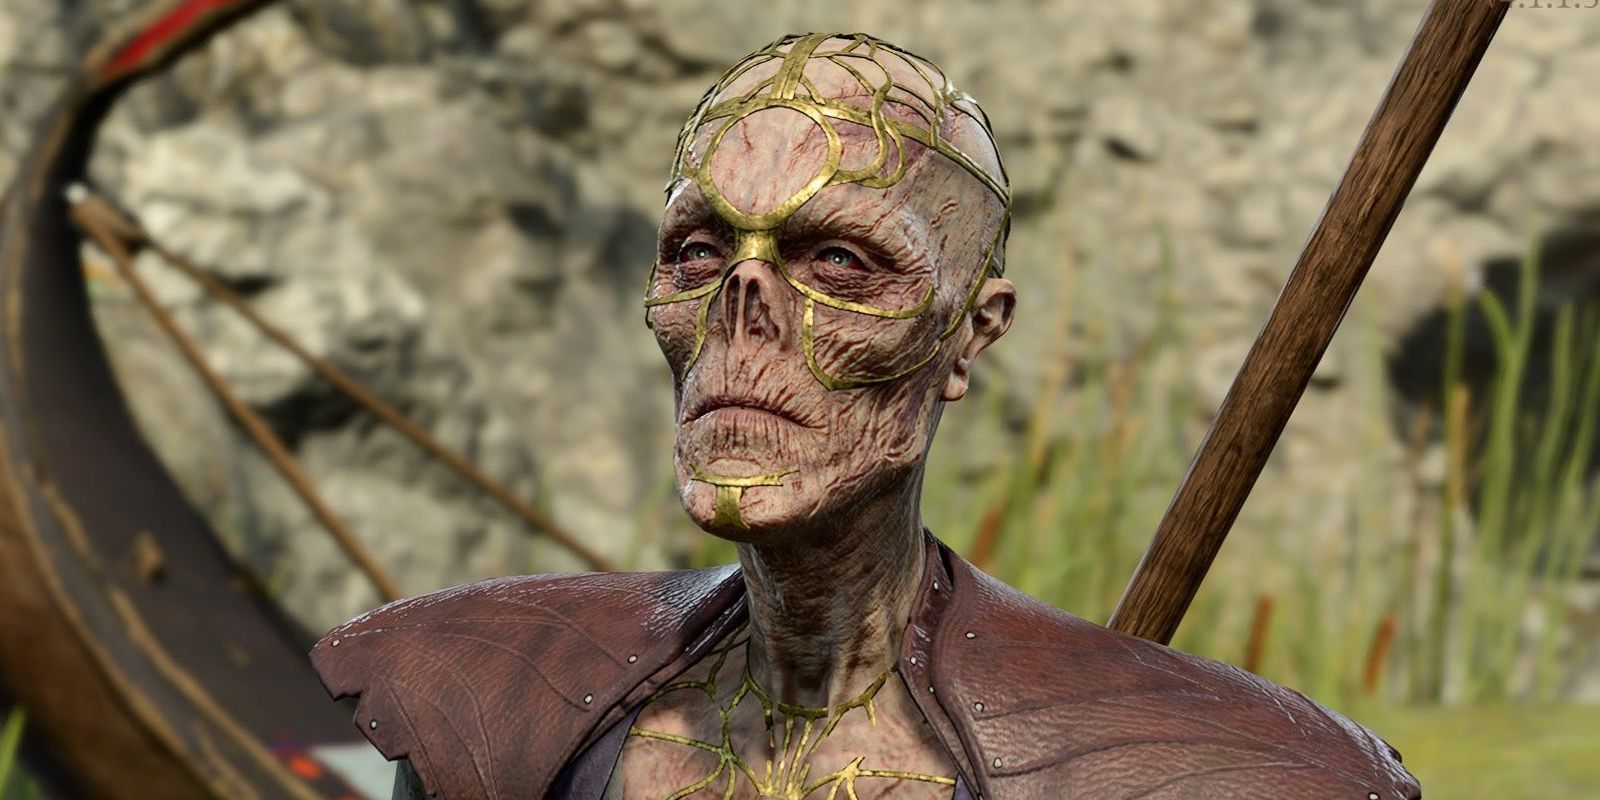 Withers, an aptly withered skeleton, stands in a grassy clearing in a screenshot from Baldur's Gate 3.